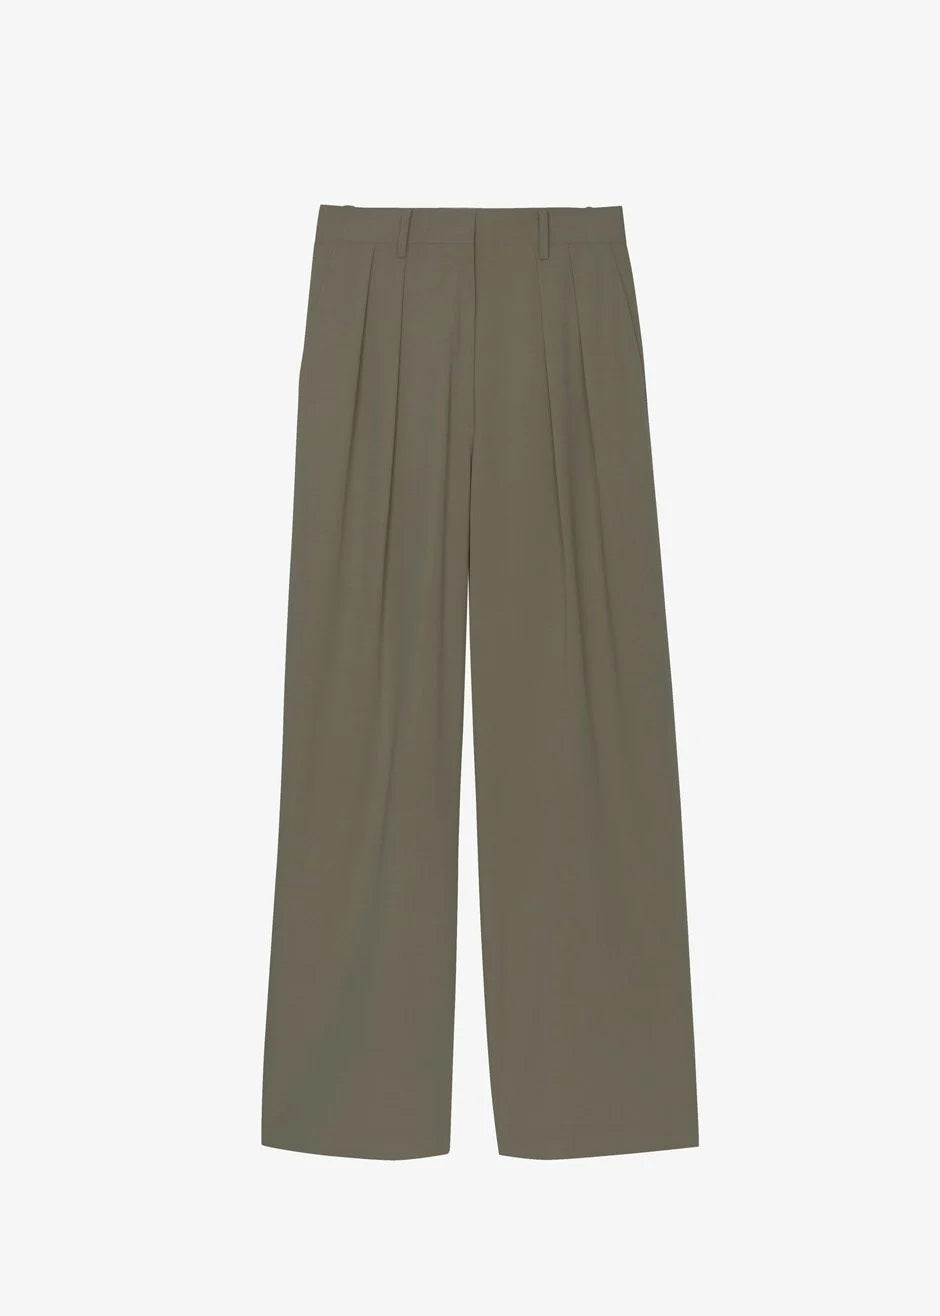 Tansy Pleated Trousers - Olive - 13